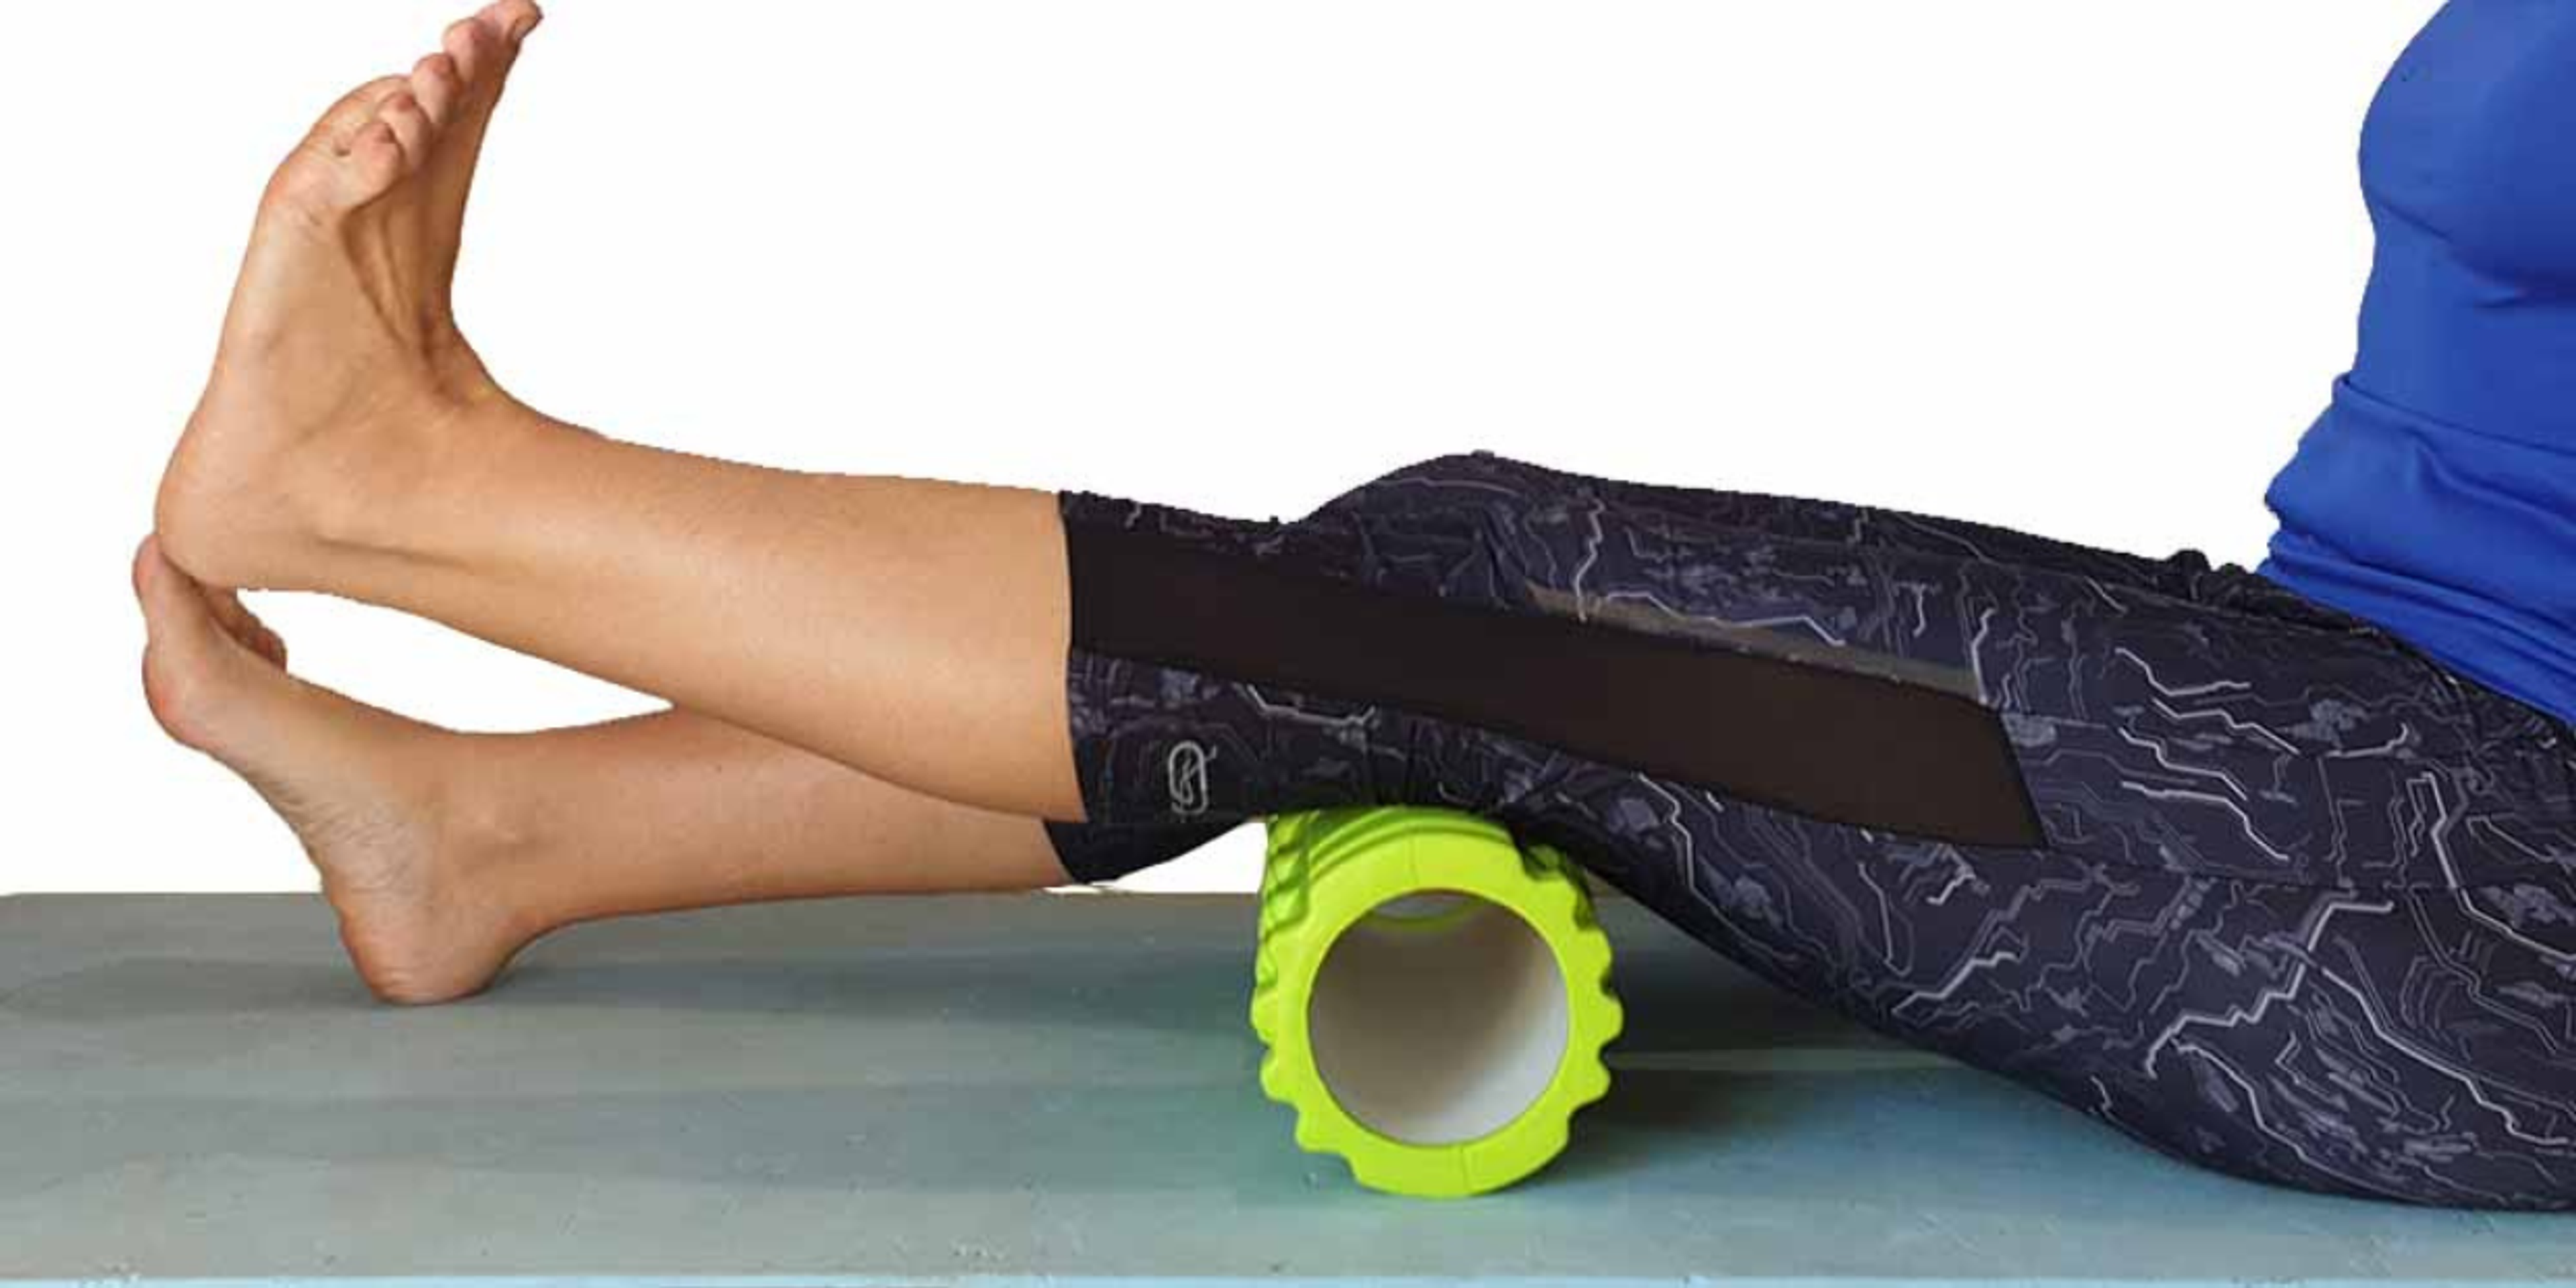 Isometric exercises activate your muscles, helping sprained knees feel more stable.